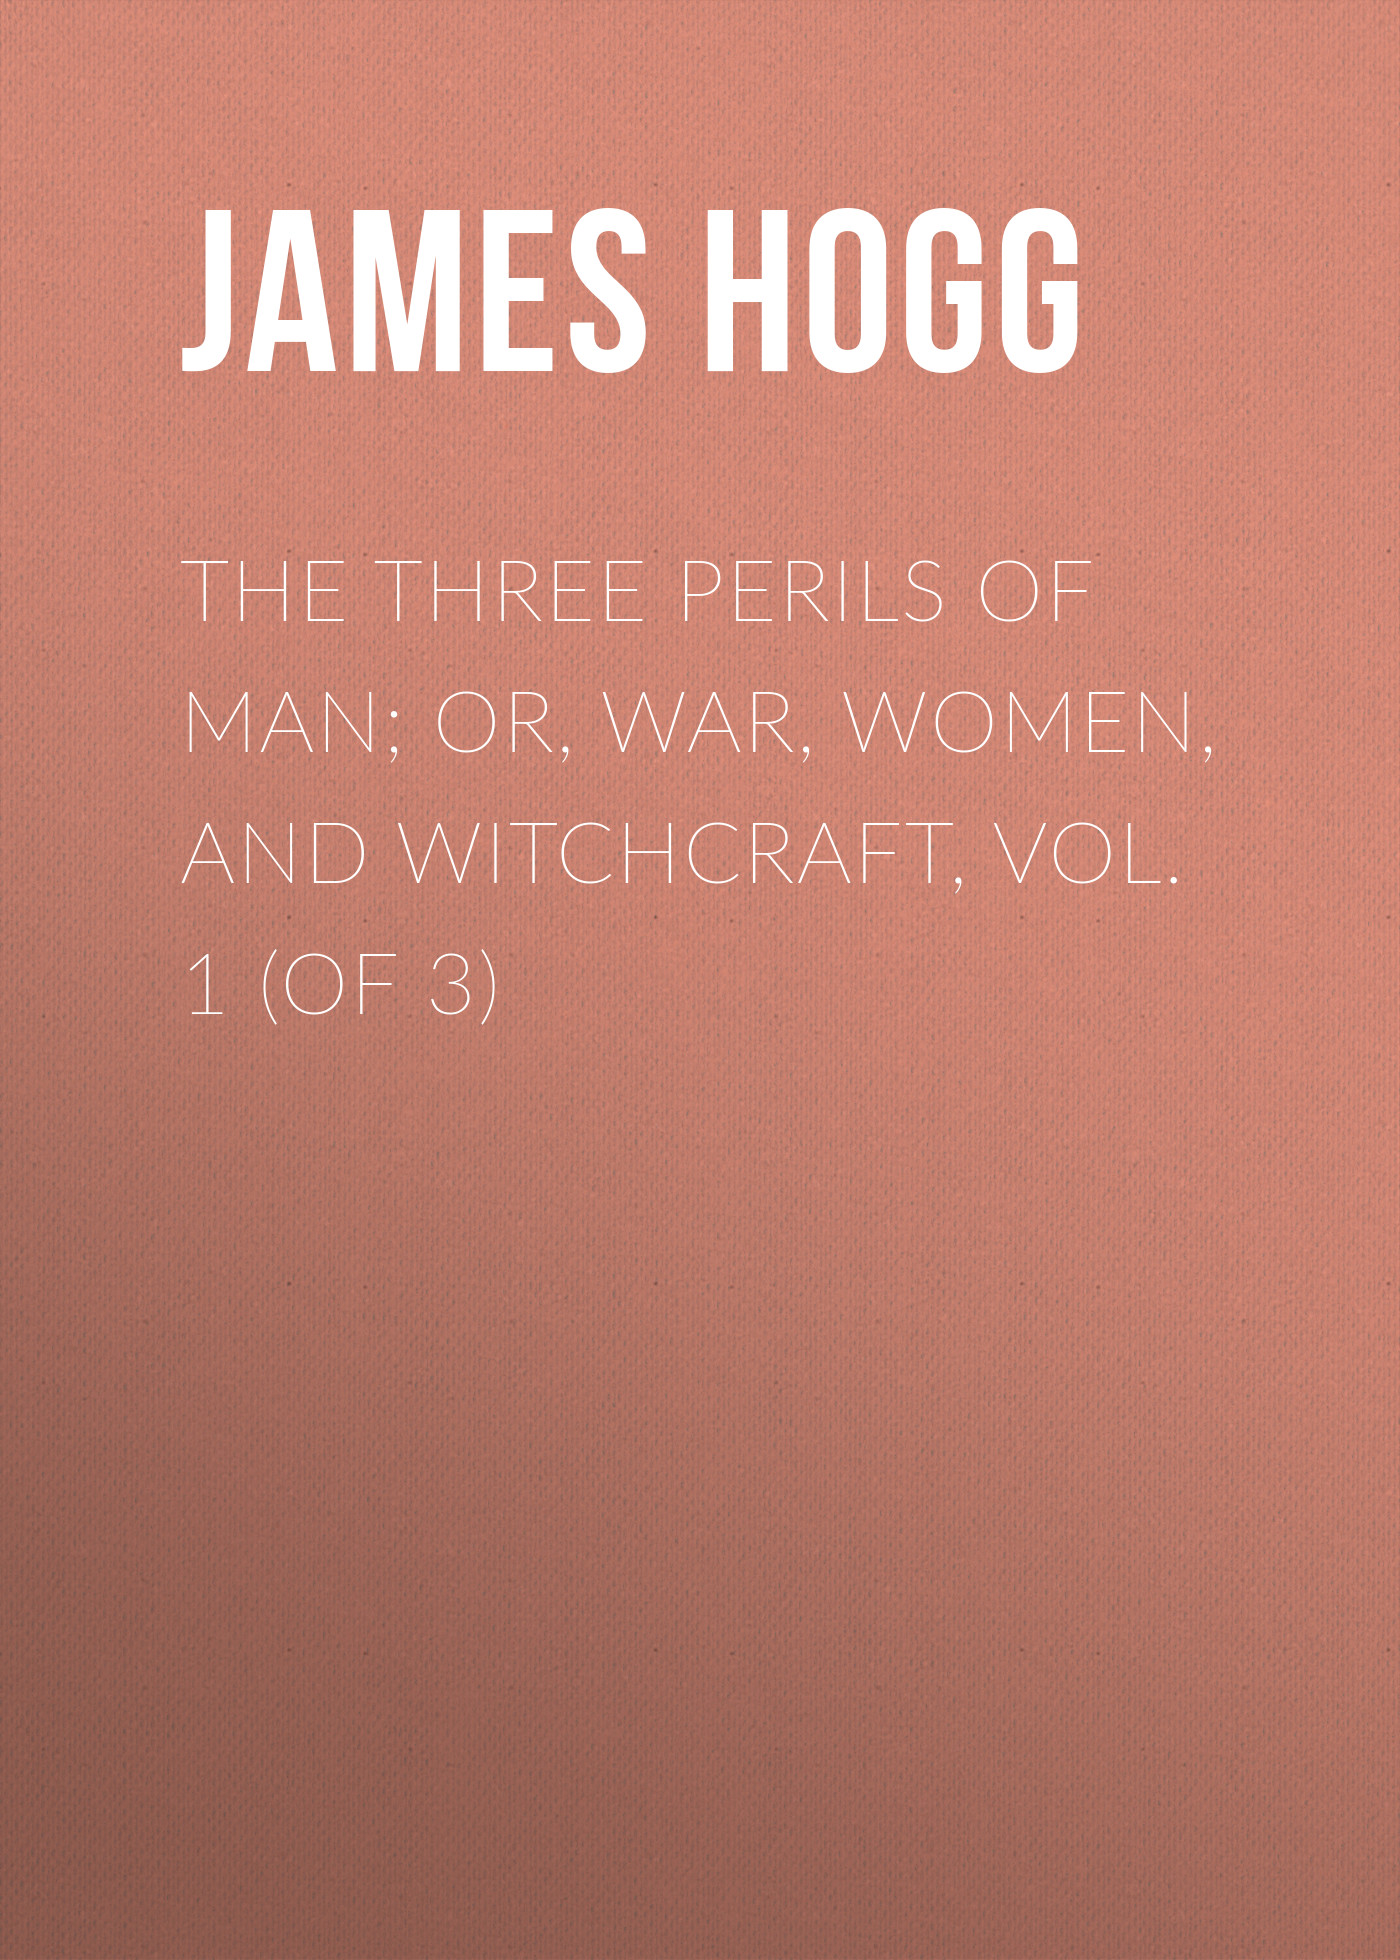 Скачать The Three Perils of Man; or, War, Women, and Witchcraft, Vol. 1 (of 3) - James Hogg